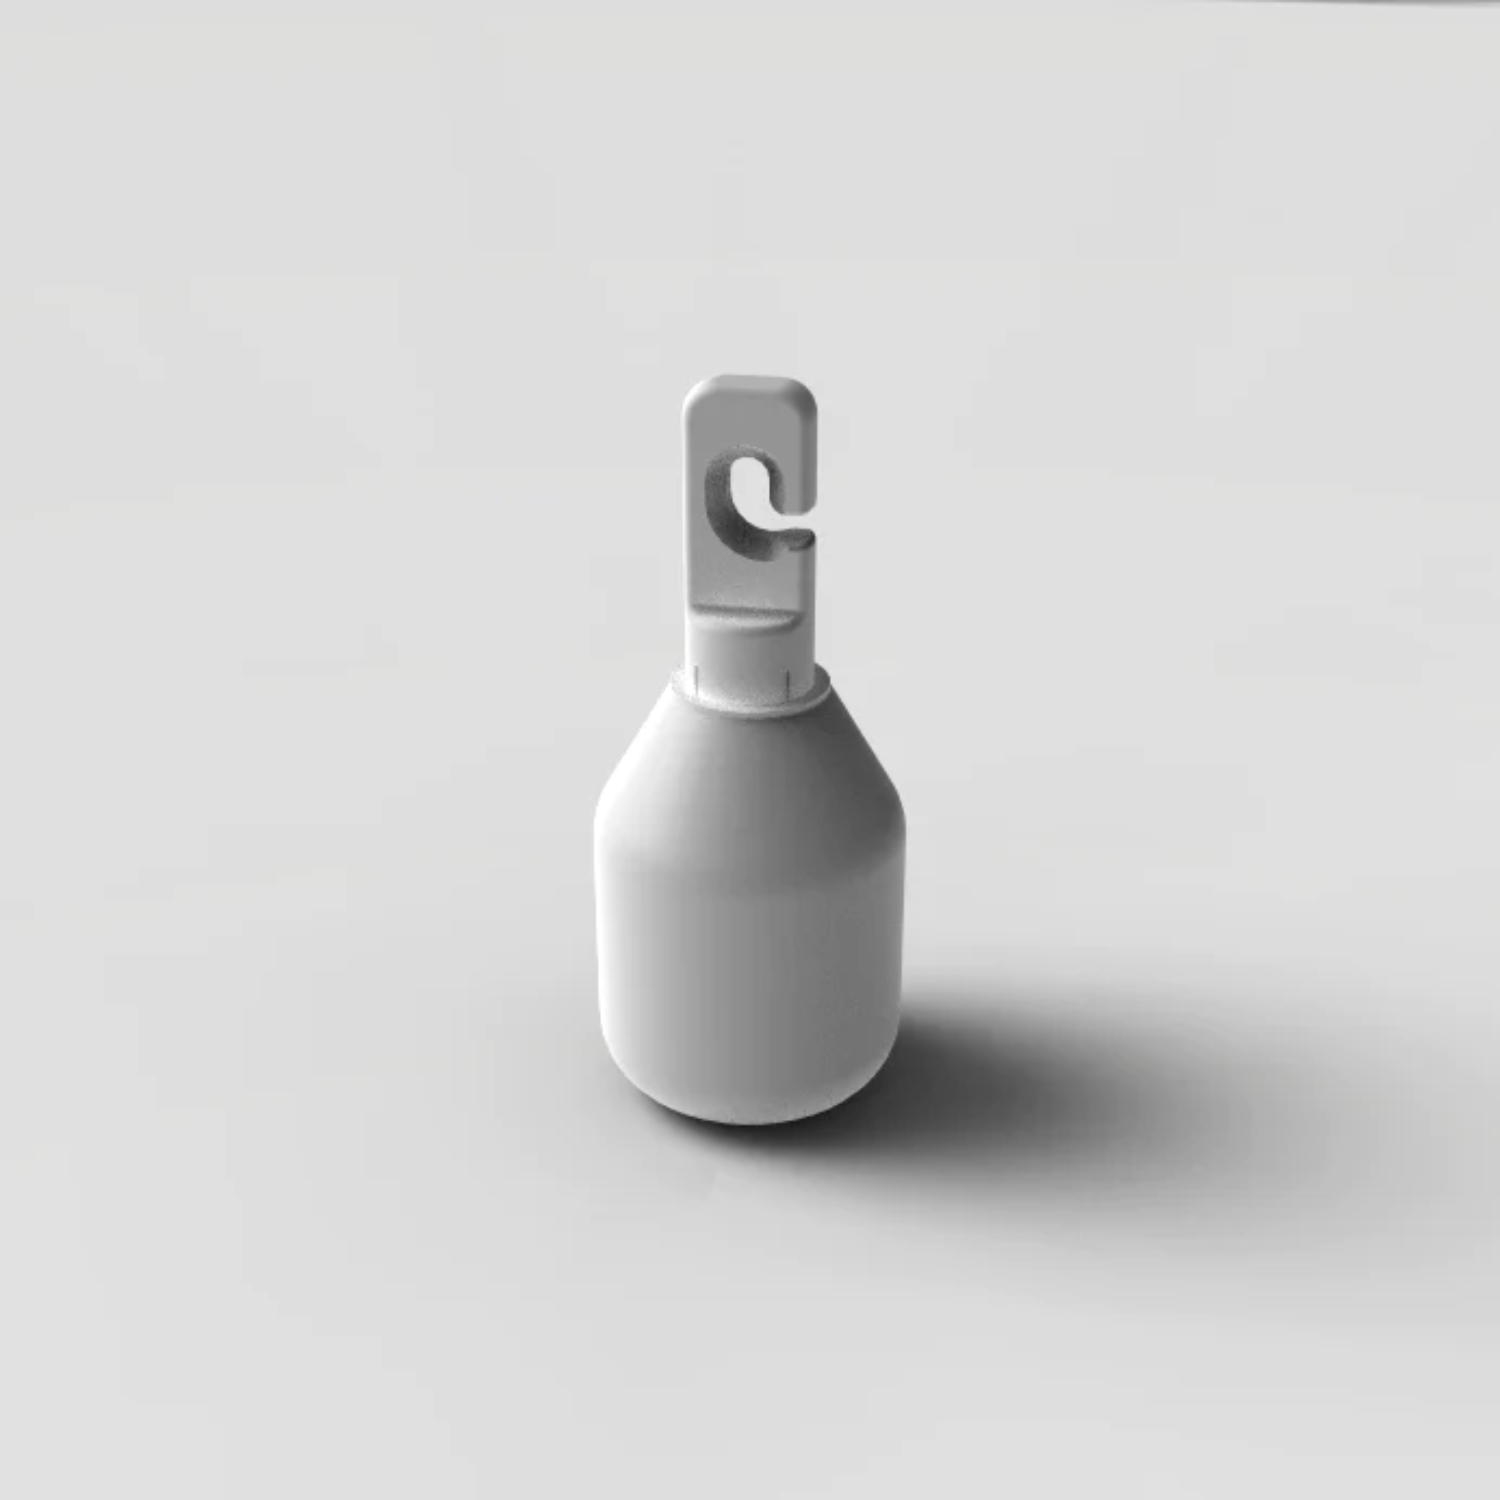 Image of a white non-roller marshmallow cane tip from Ambutech